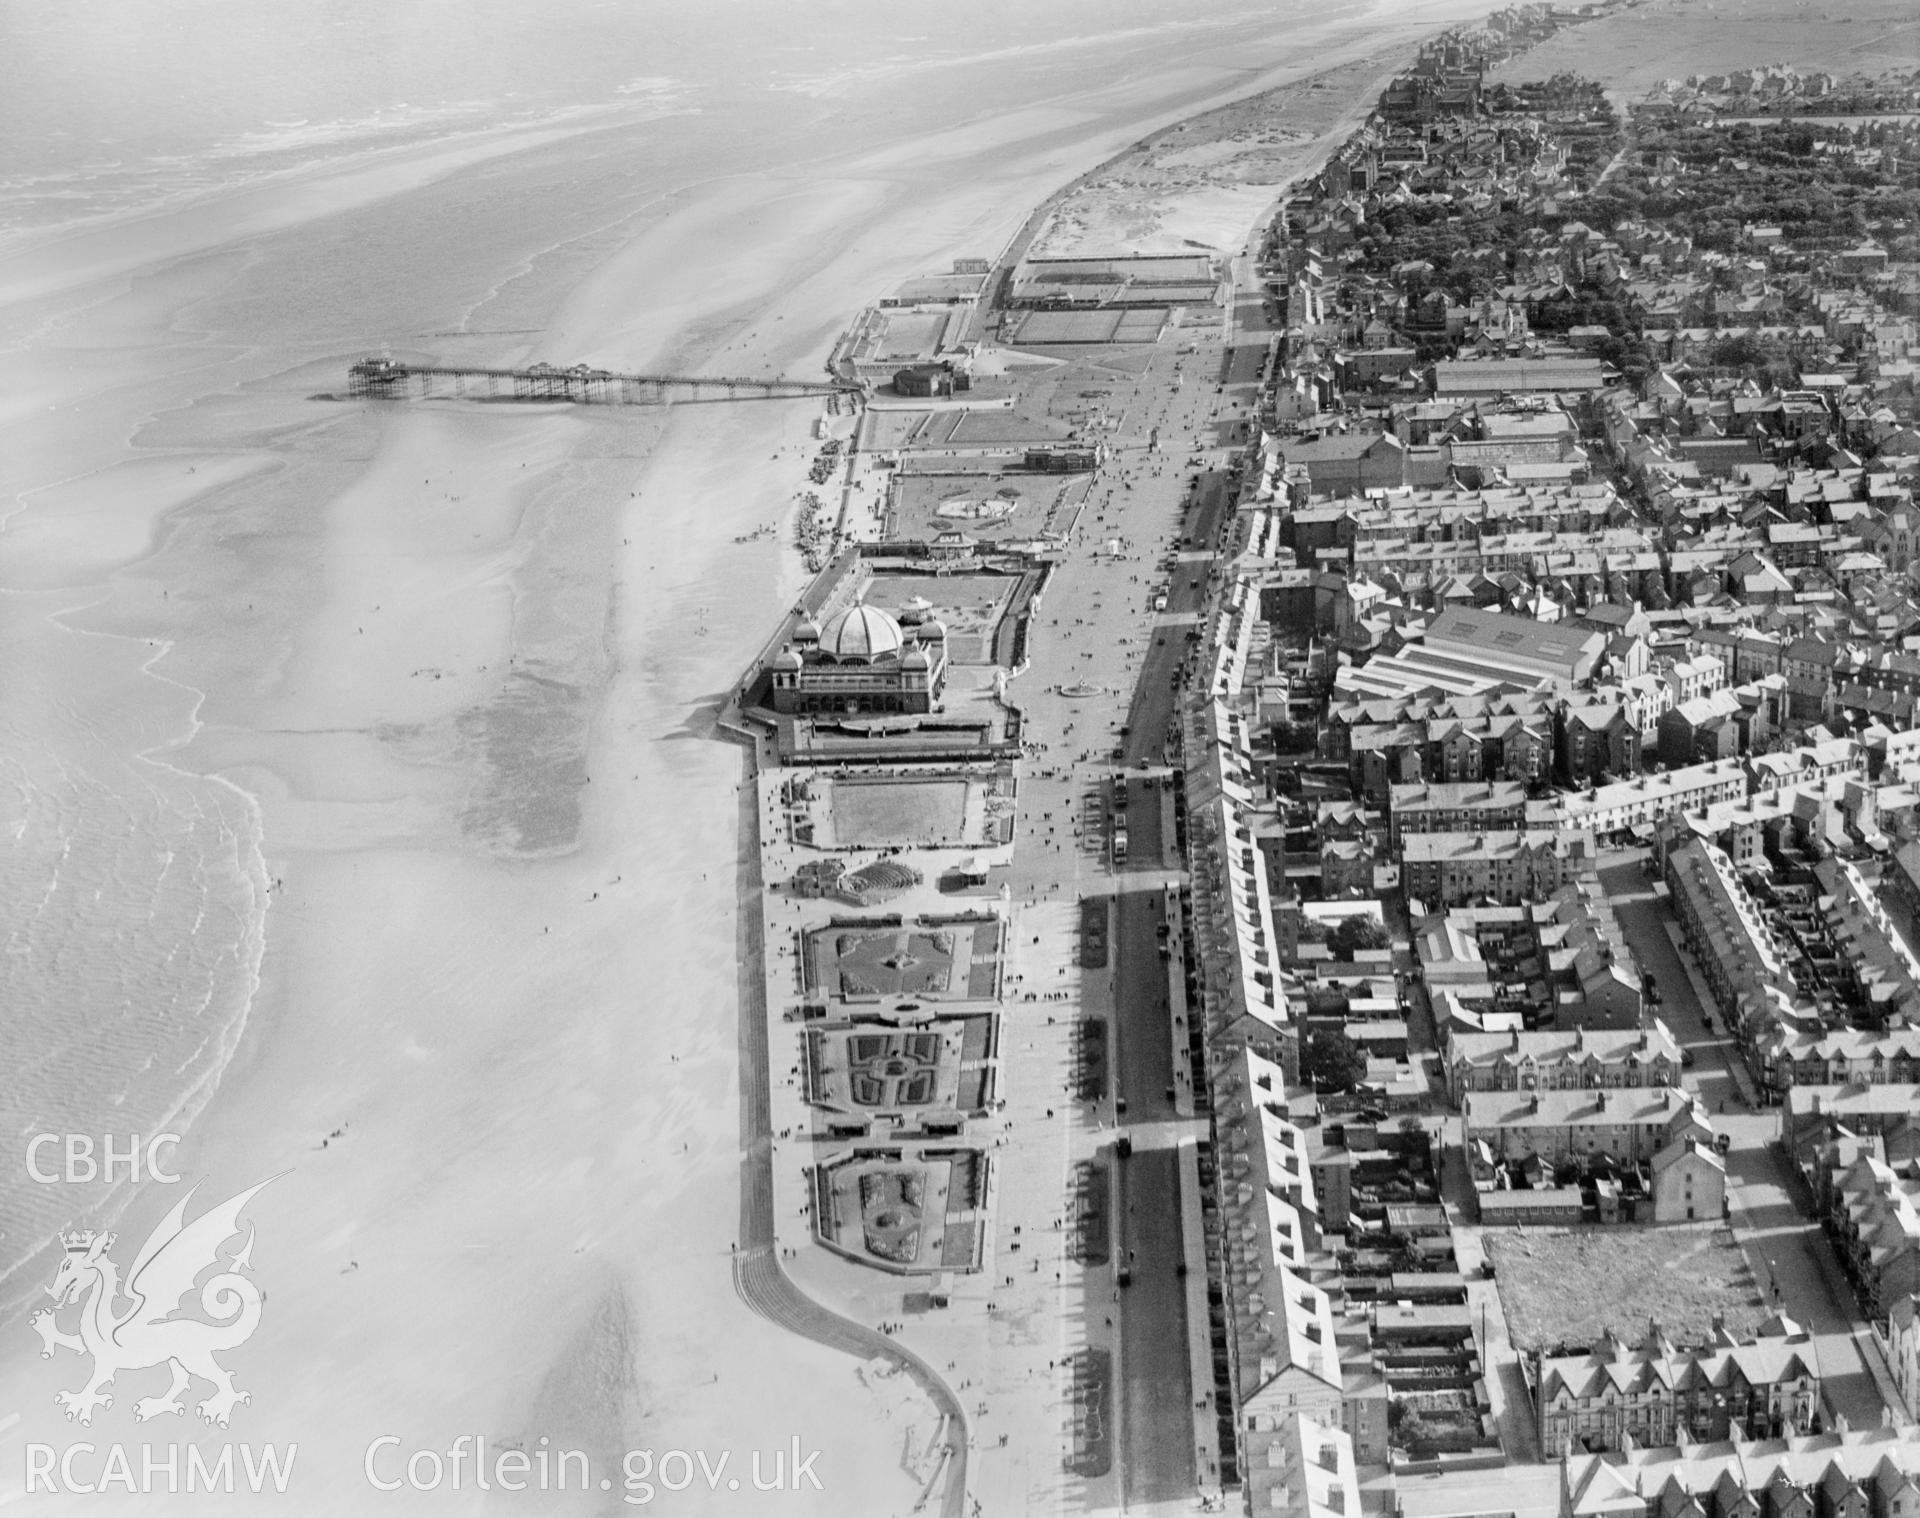 View of Rhyl showing promenade, pier, bandstand, pleasure gardens and open air swimming pool, oblique aerial view. 5?x4? black and white glass plate negative.